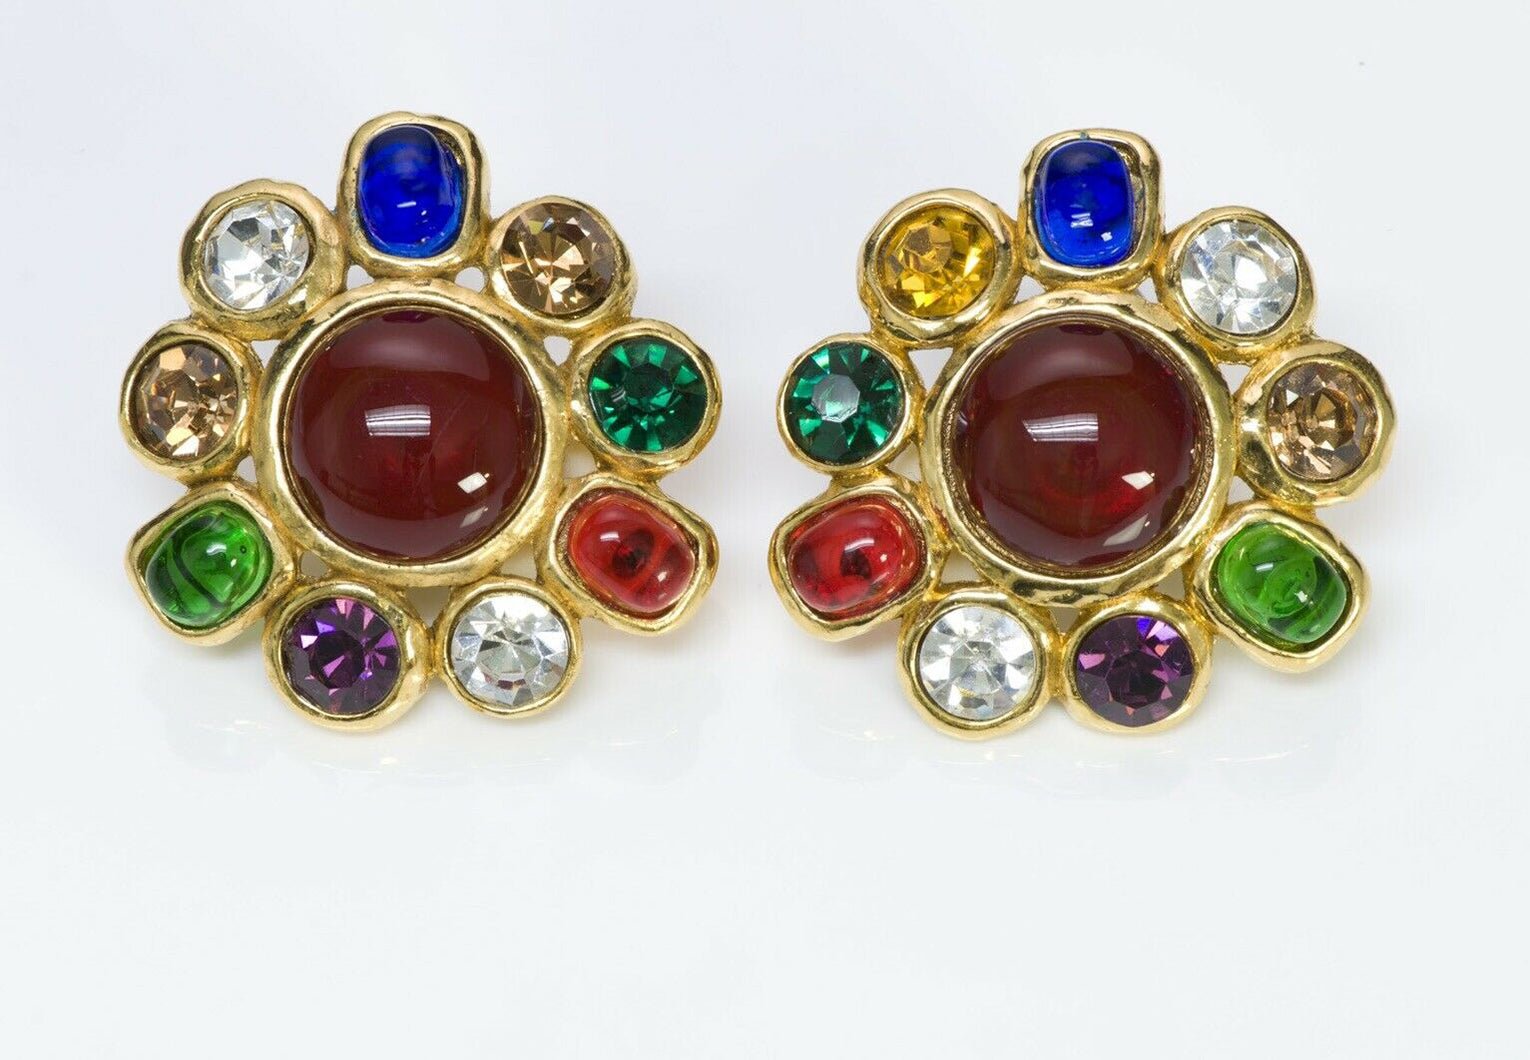 Chanel Costume Jewelry & Chanel Accessories - DSF Antique Jewelry